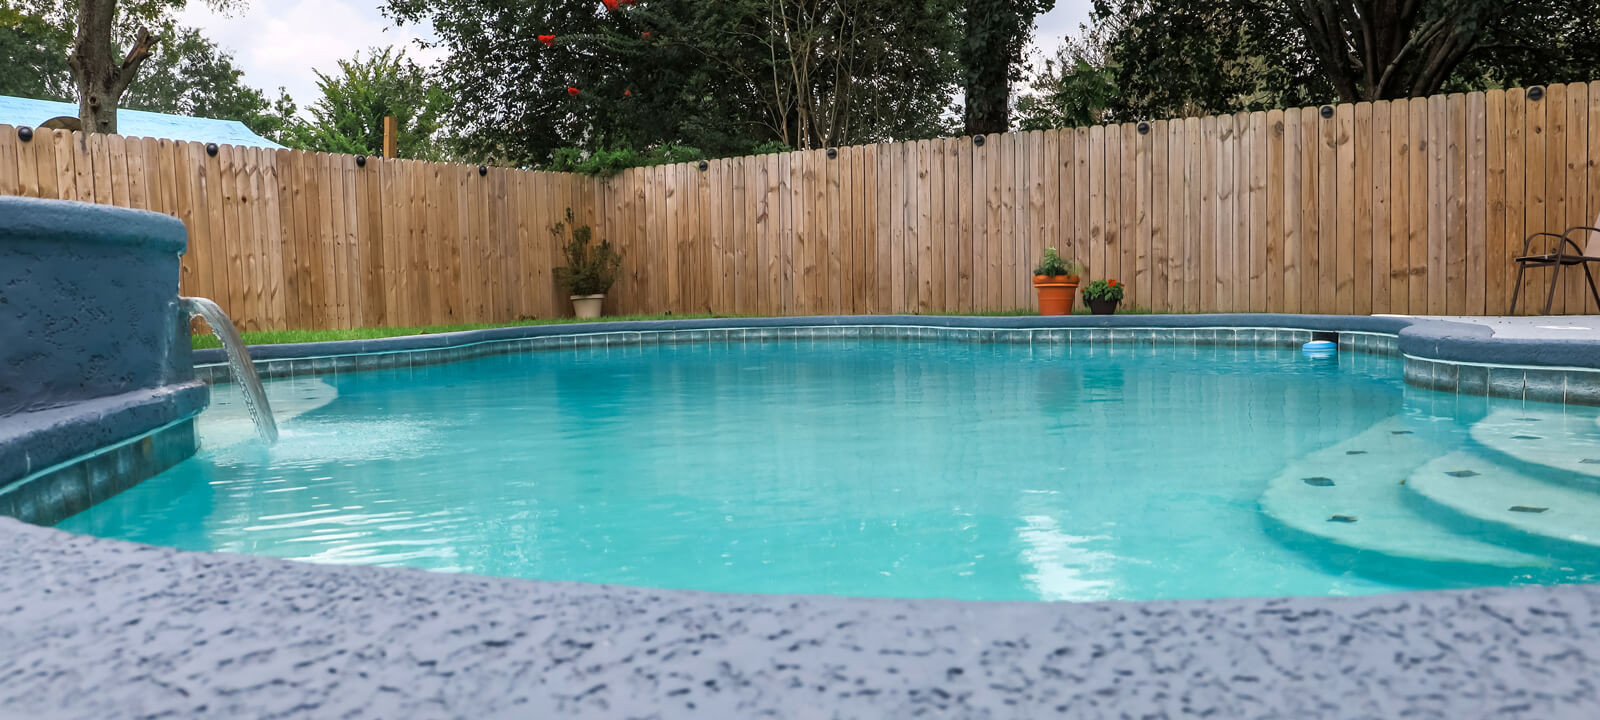 Low Angle View Of A Large Free Form Gray Grey Accent Swimming Pool With Turquoise Blue Water In A Fenced In Backyard In A Suburban Neighborhood